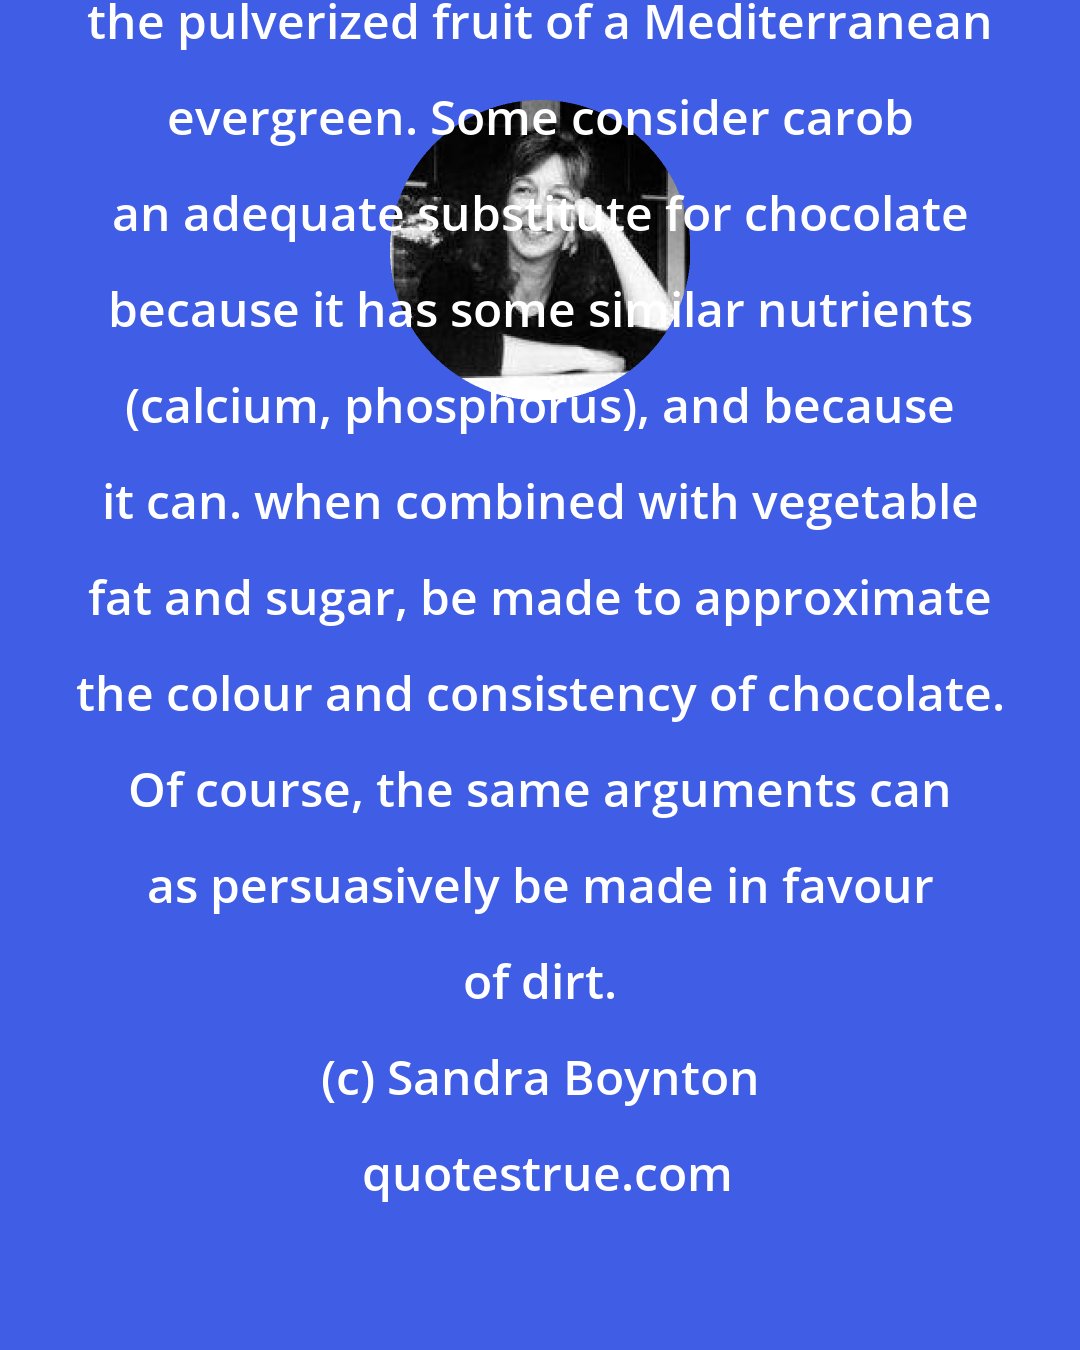 Sandra Boynton: Carob is a brown powder made from the pulverized fruit of a Mediterranean evergreen. Some consider carob an adequate substitute for chocolate because it has some similar nutrients (calcium, phosphorus), and because it can. when combined with vegetable fat and sugar, be made to approximate the colour and consistency of chocolate. Of course, the same arguments can as persuasively be made in favour of dirt.